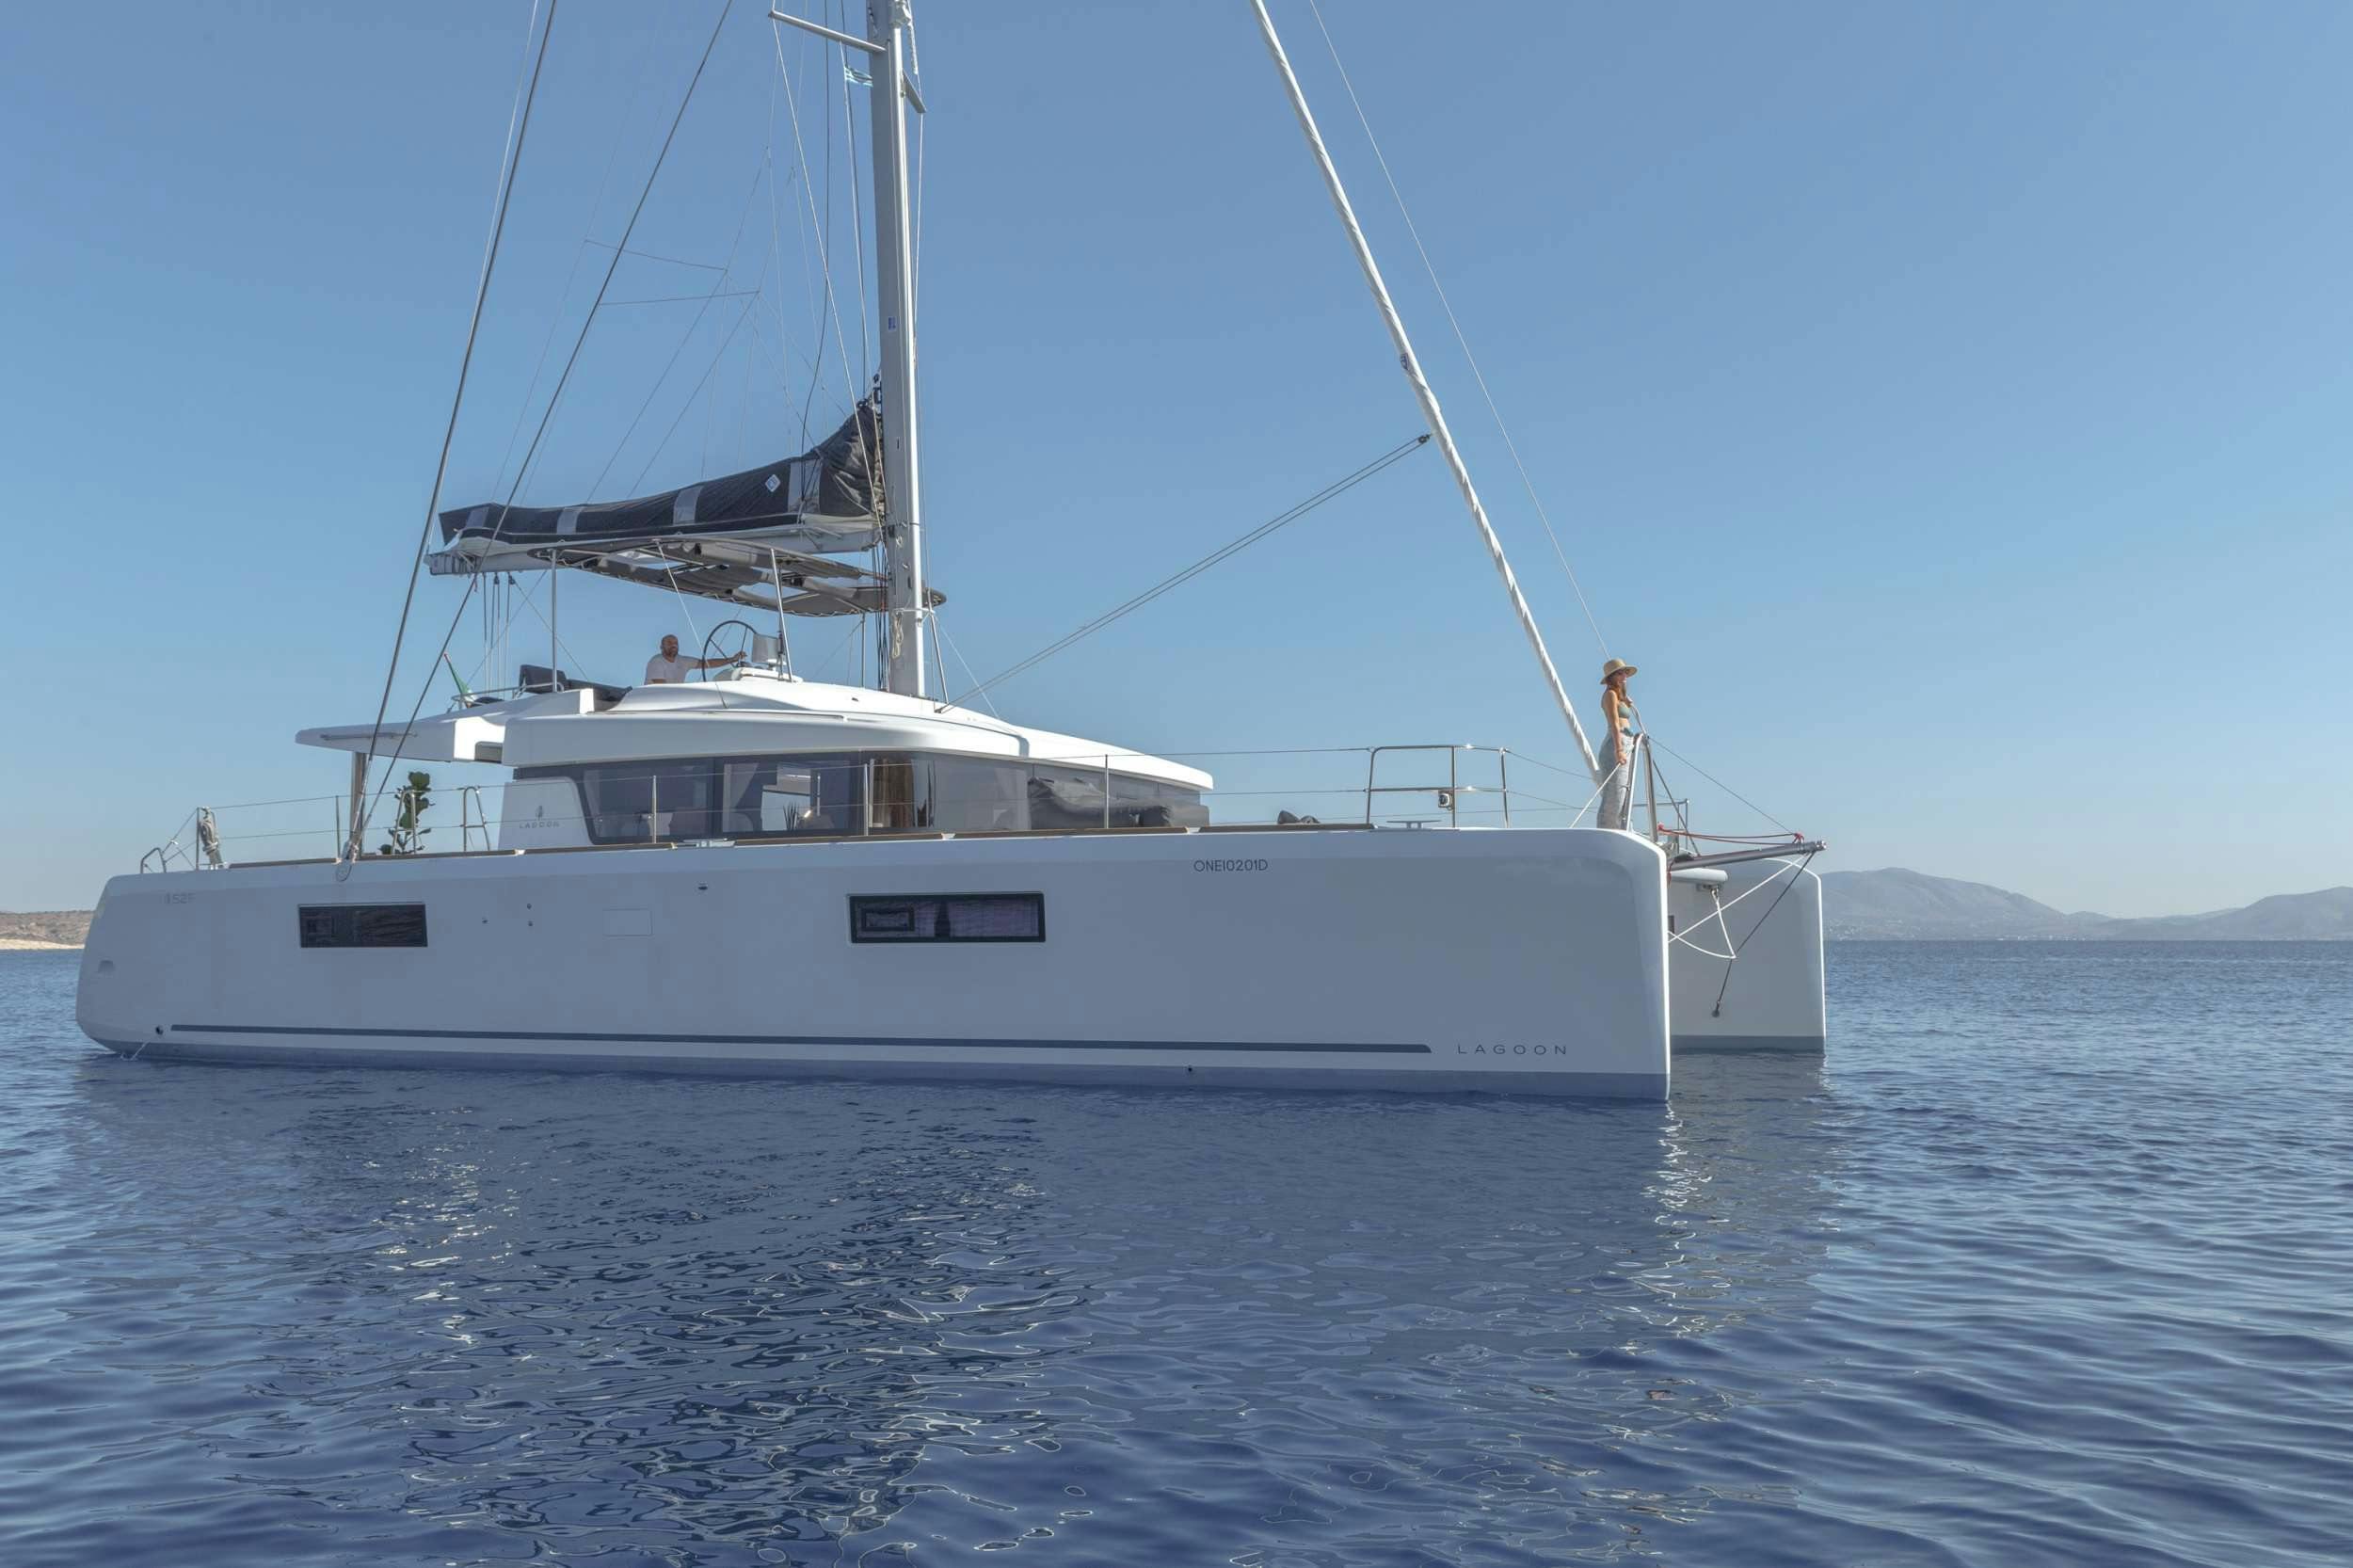 ONEIDA - Yacht Charter Vancouver Island & Boat hire in Greece 1